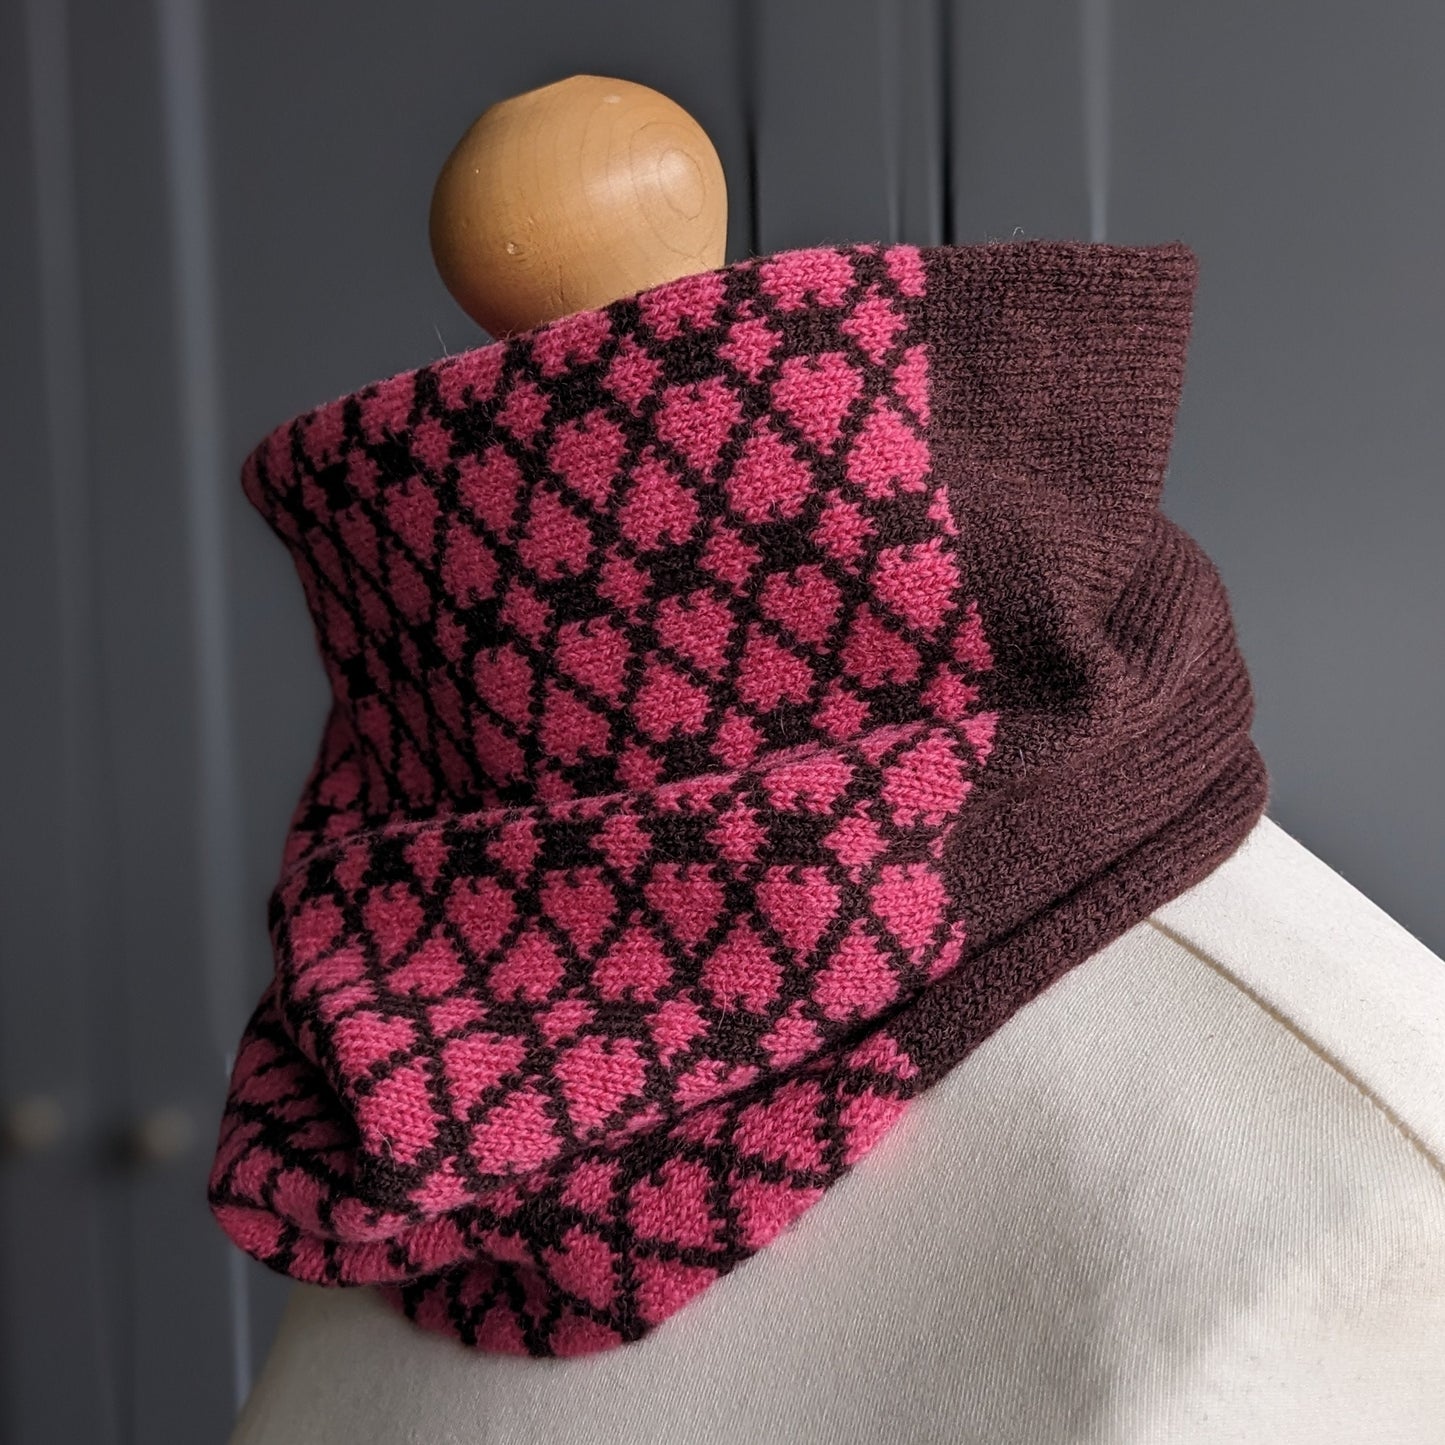 Lambswool knitted Fair Isle cowl in heart design - pink and brown